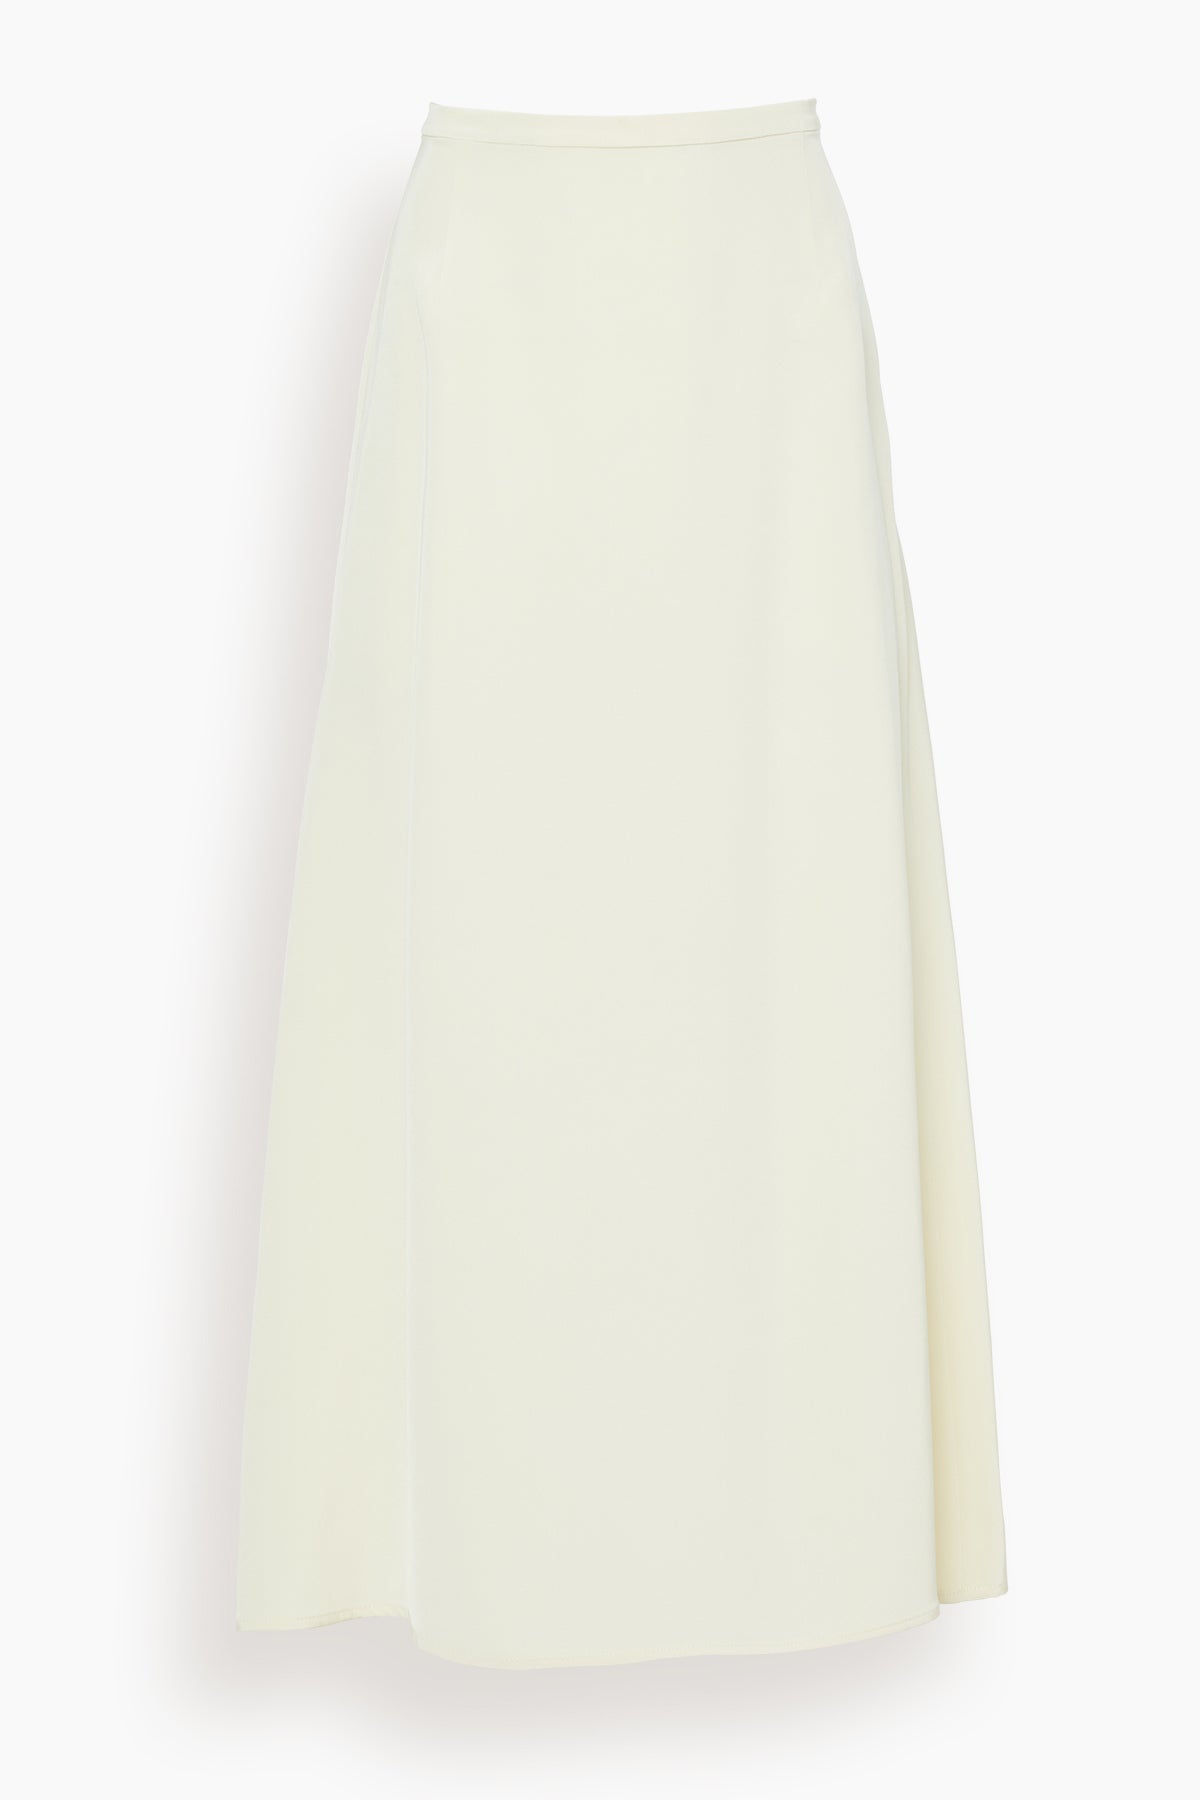 La Collection Skirts Elisabeth Skirt in Off White